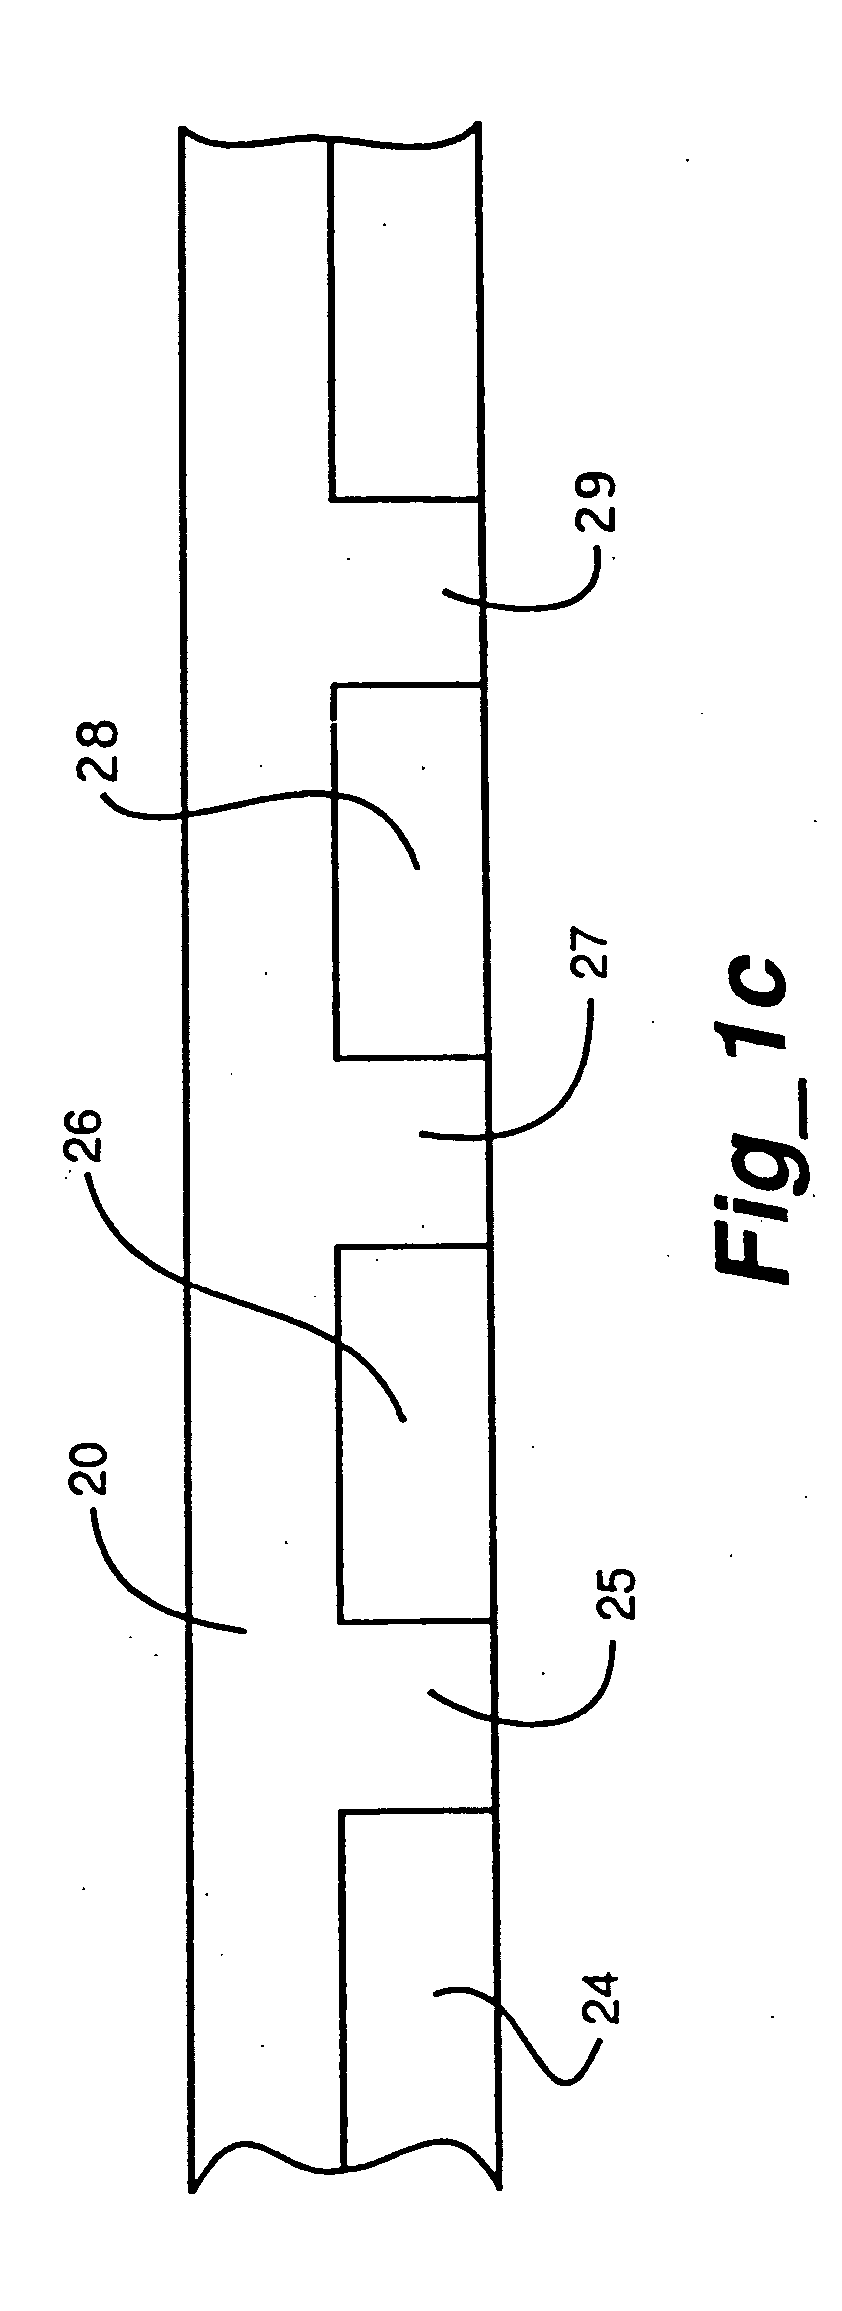 Flexible and elastic dielectric integrated circuit